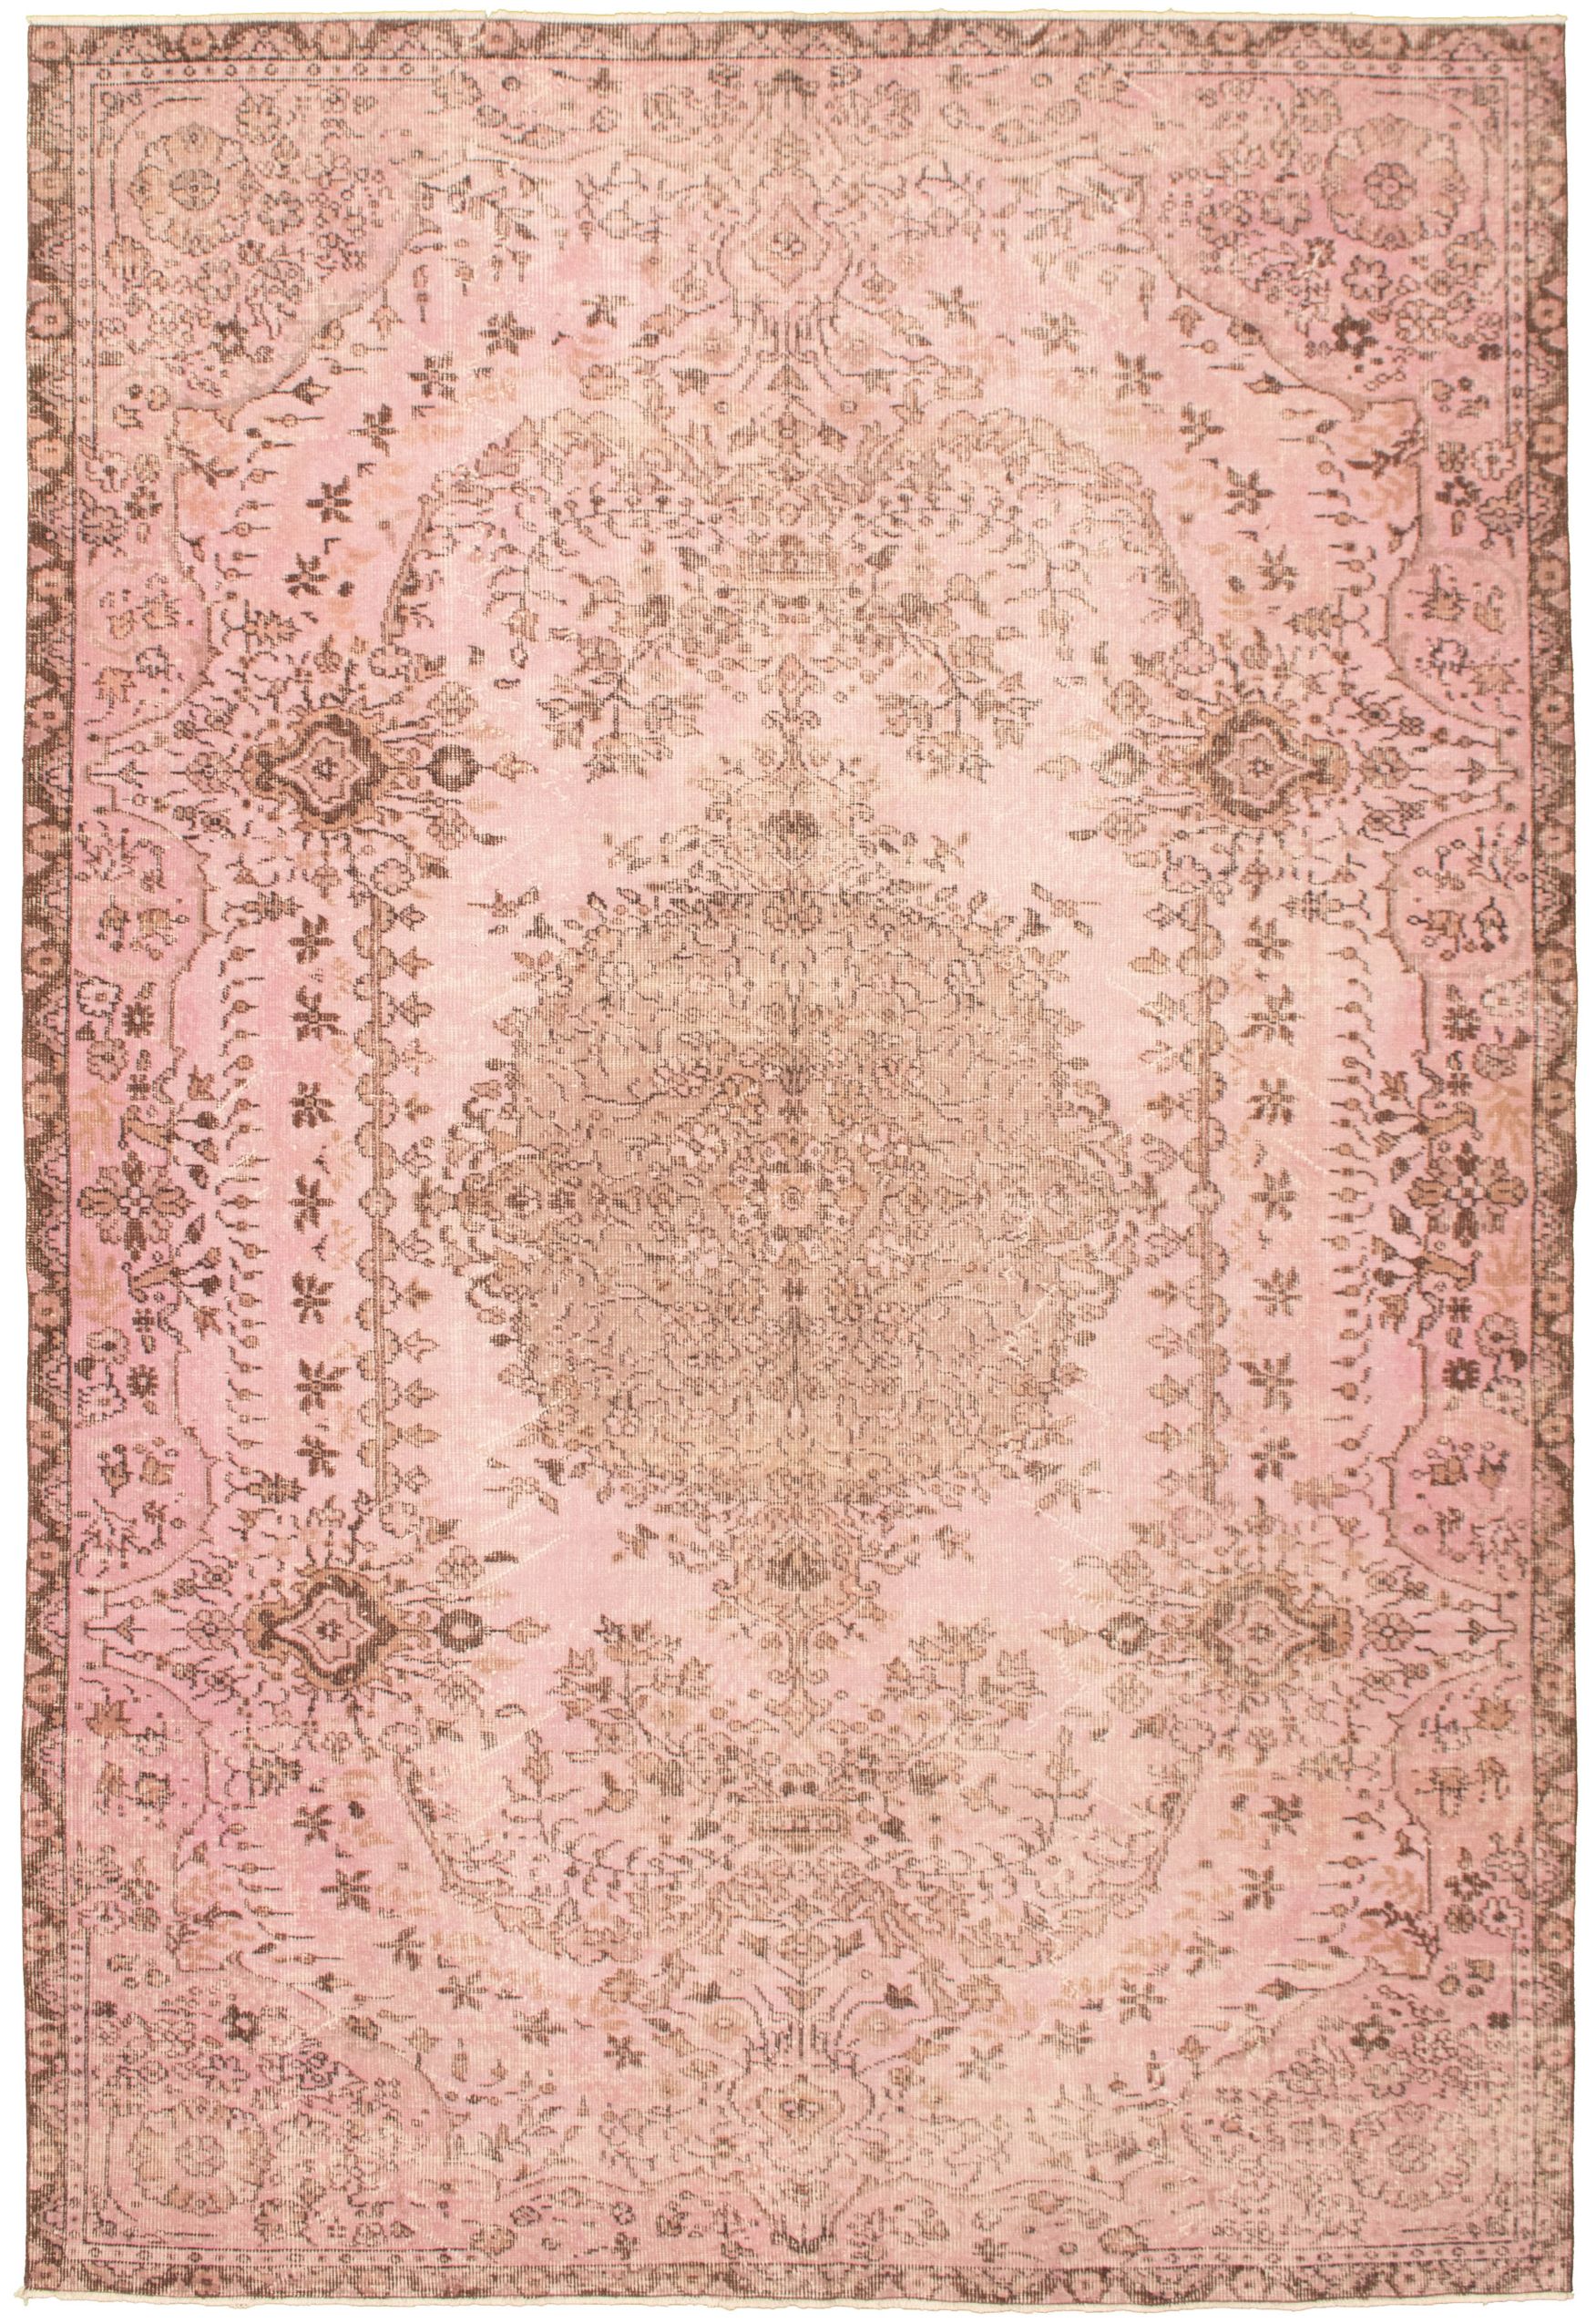 Hand-knotted Color Transition Salmon Wool Rug 6'7" x 9'8" Size: 6'7" x 9'8"  